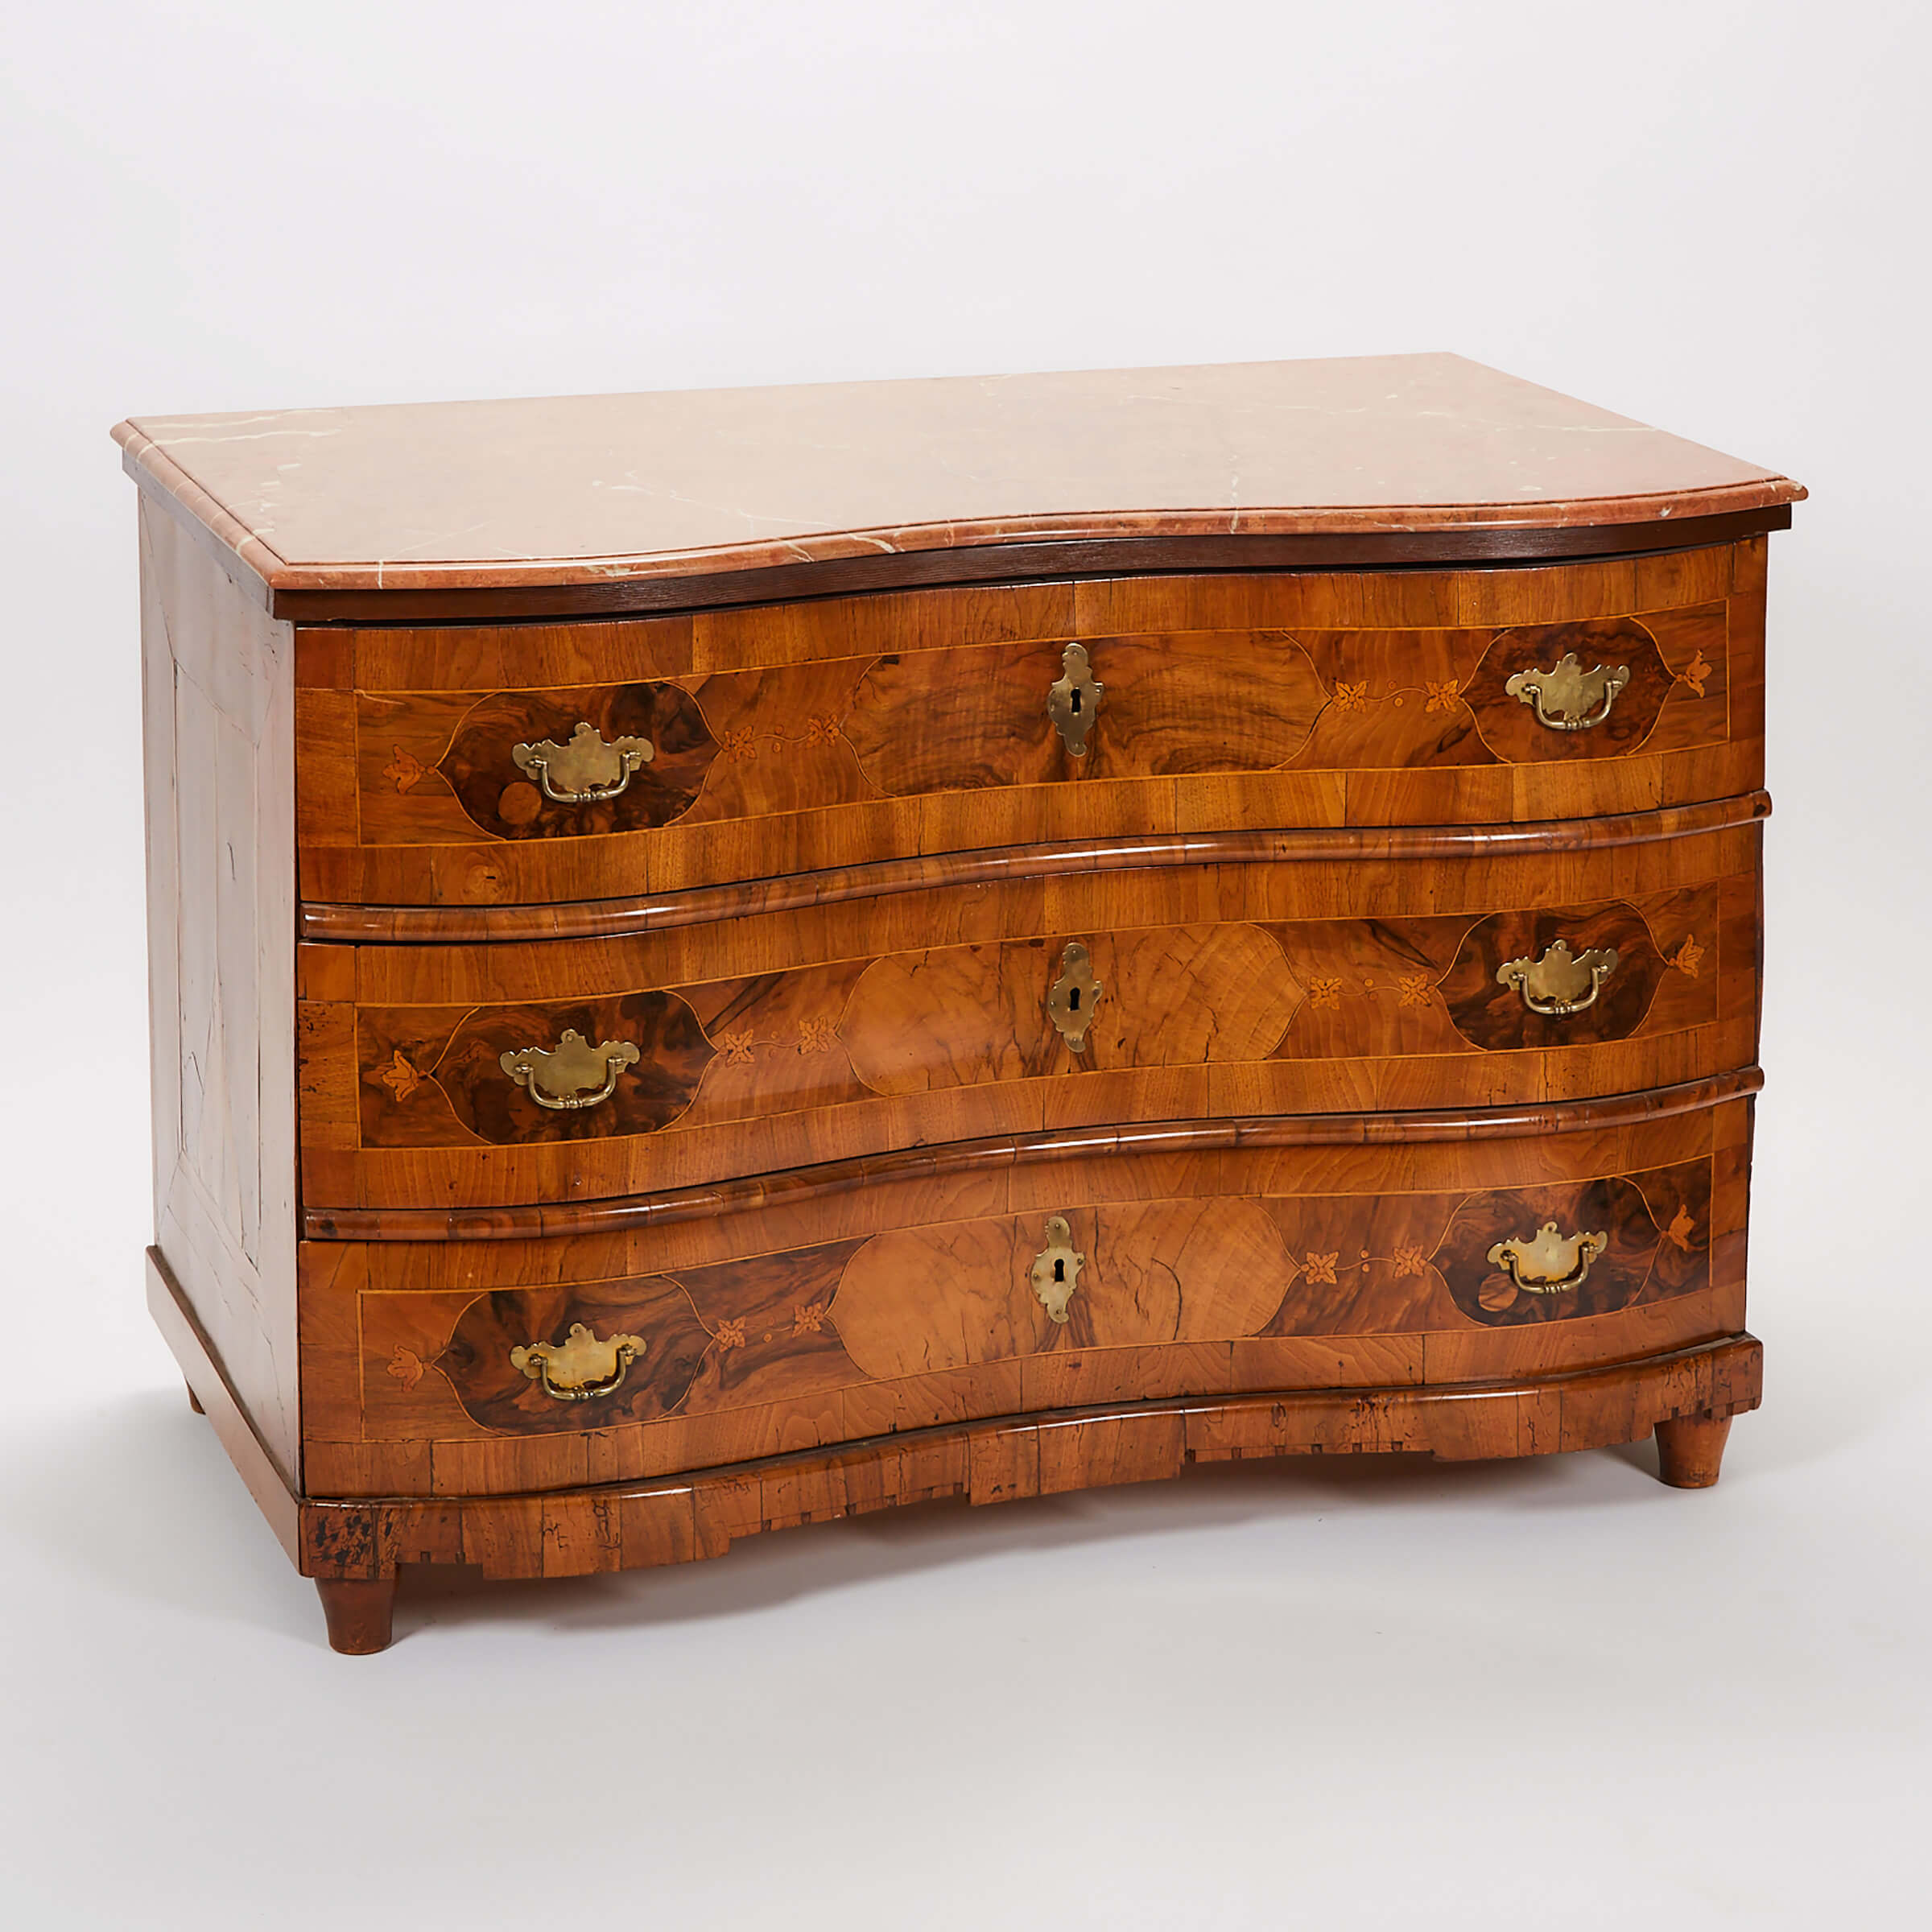 South German Walnut Crossbanded Marquetry Serpentine Front Commode with Marble Top, 18th century